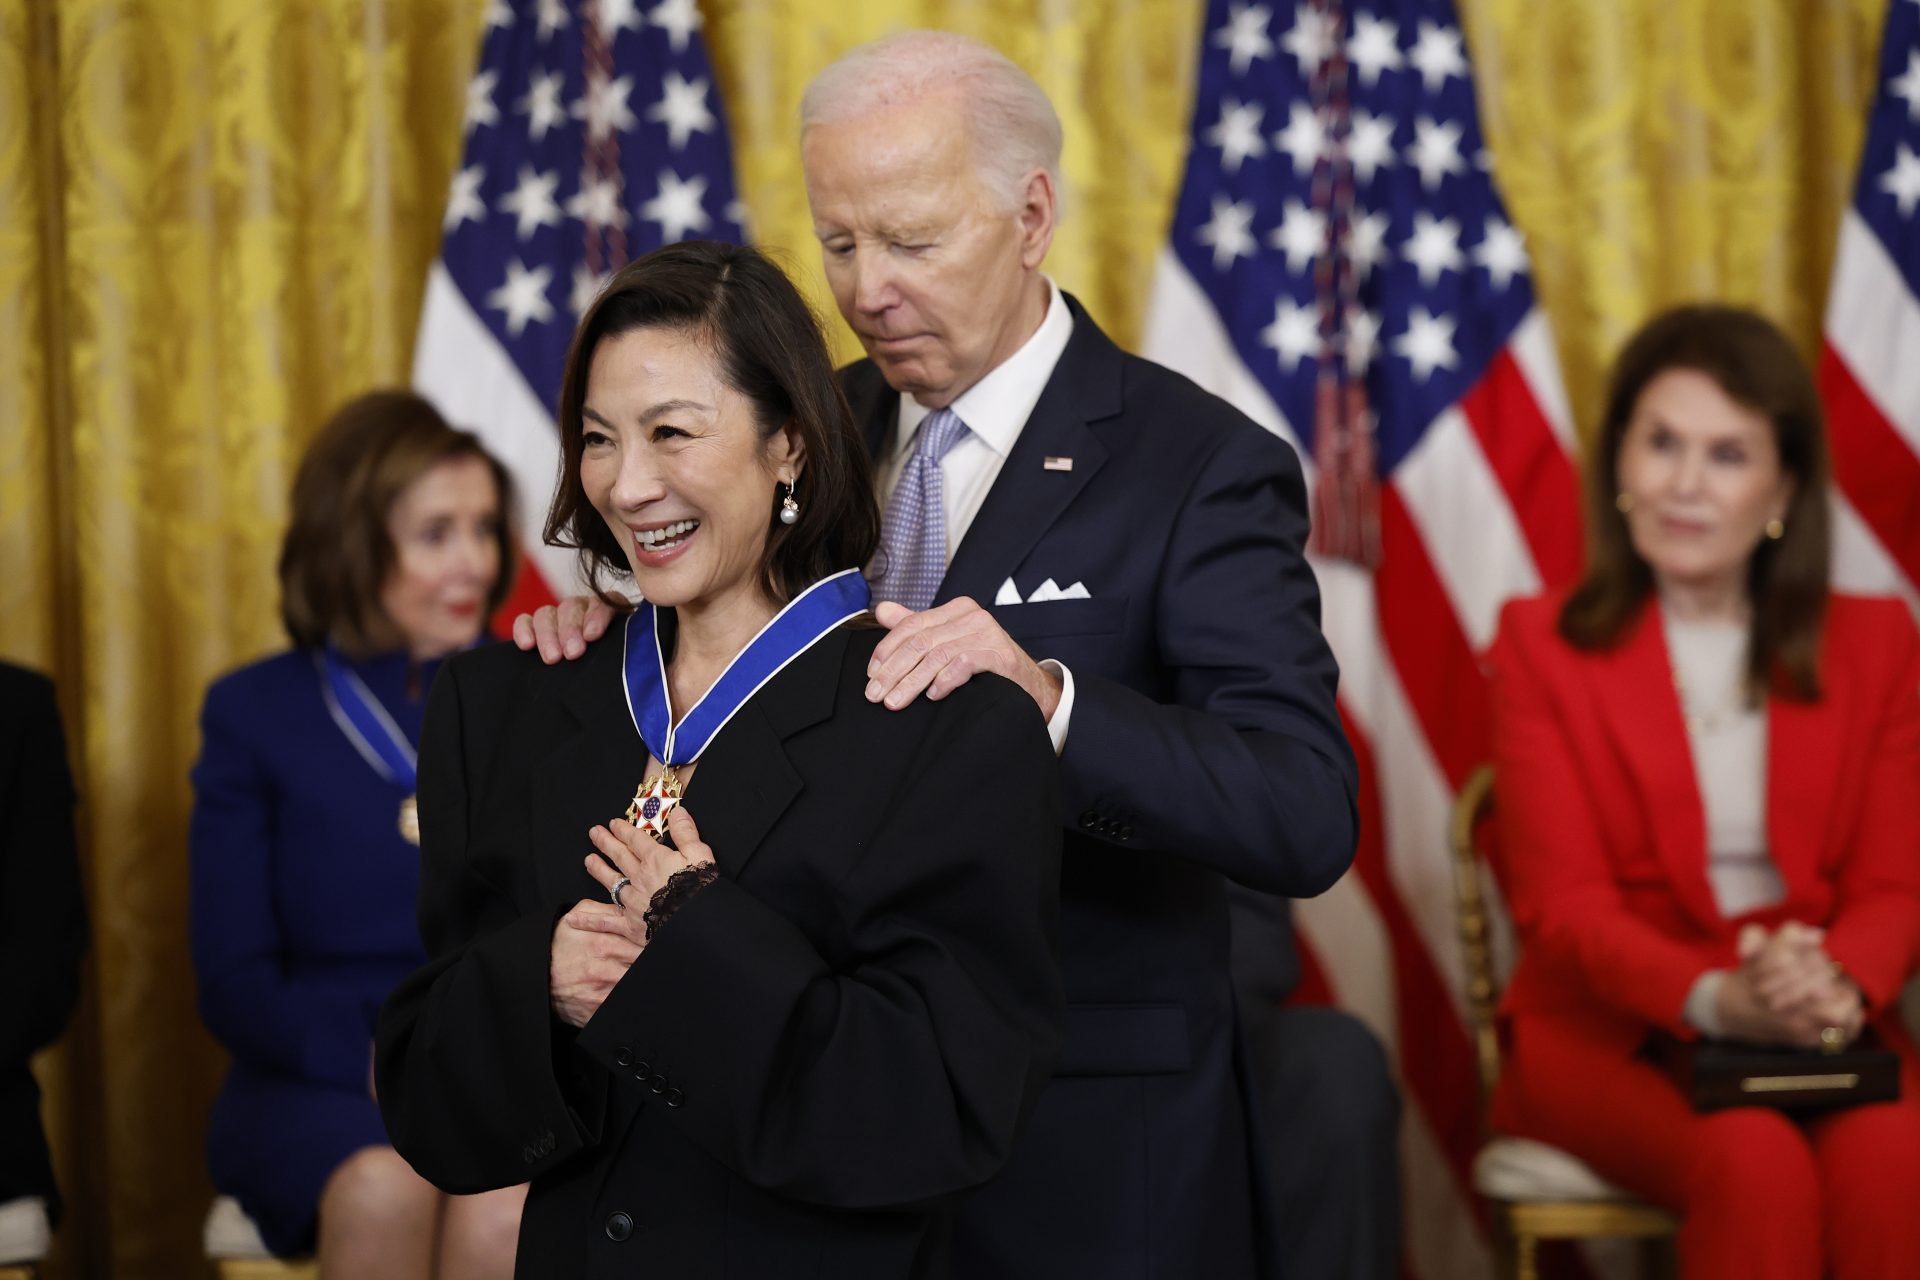 Michelle Yeoh: highest civilian award by President Biden only the latest of her triumphs